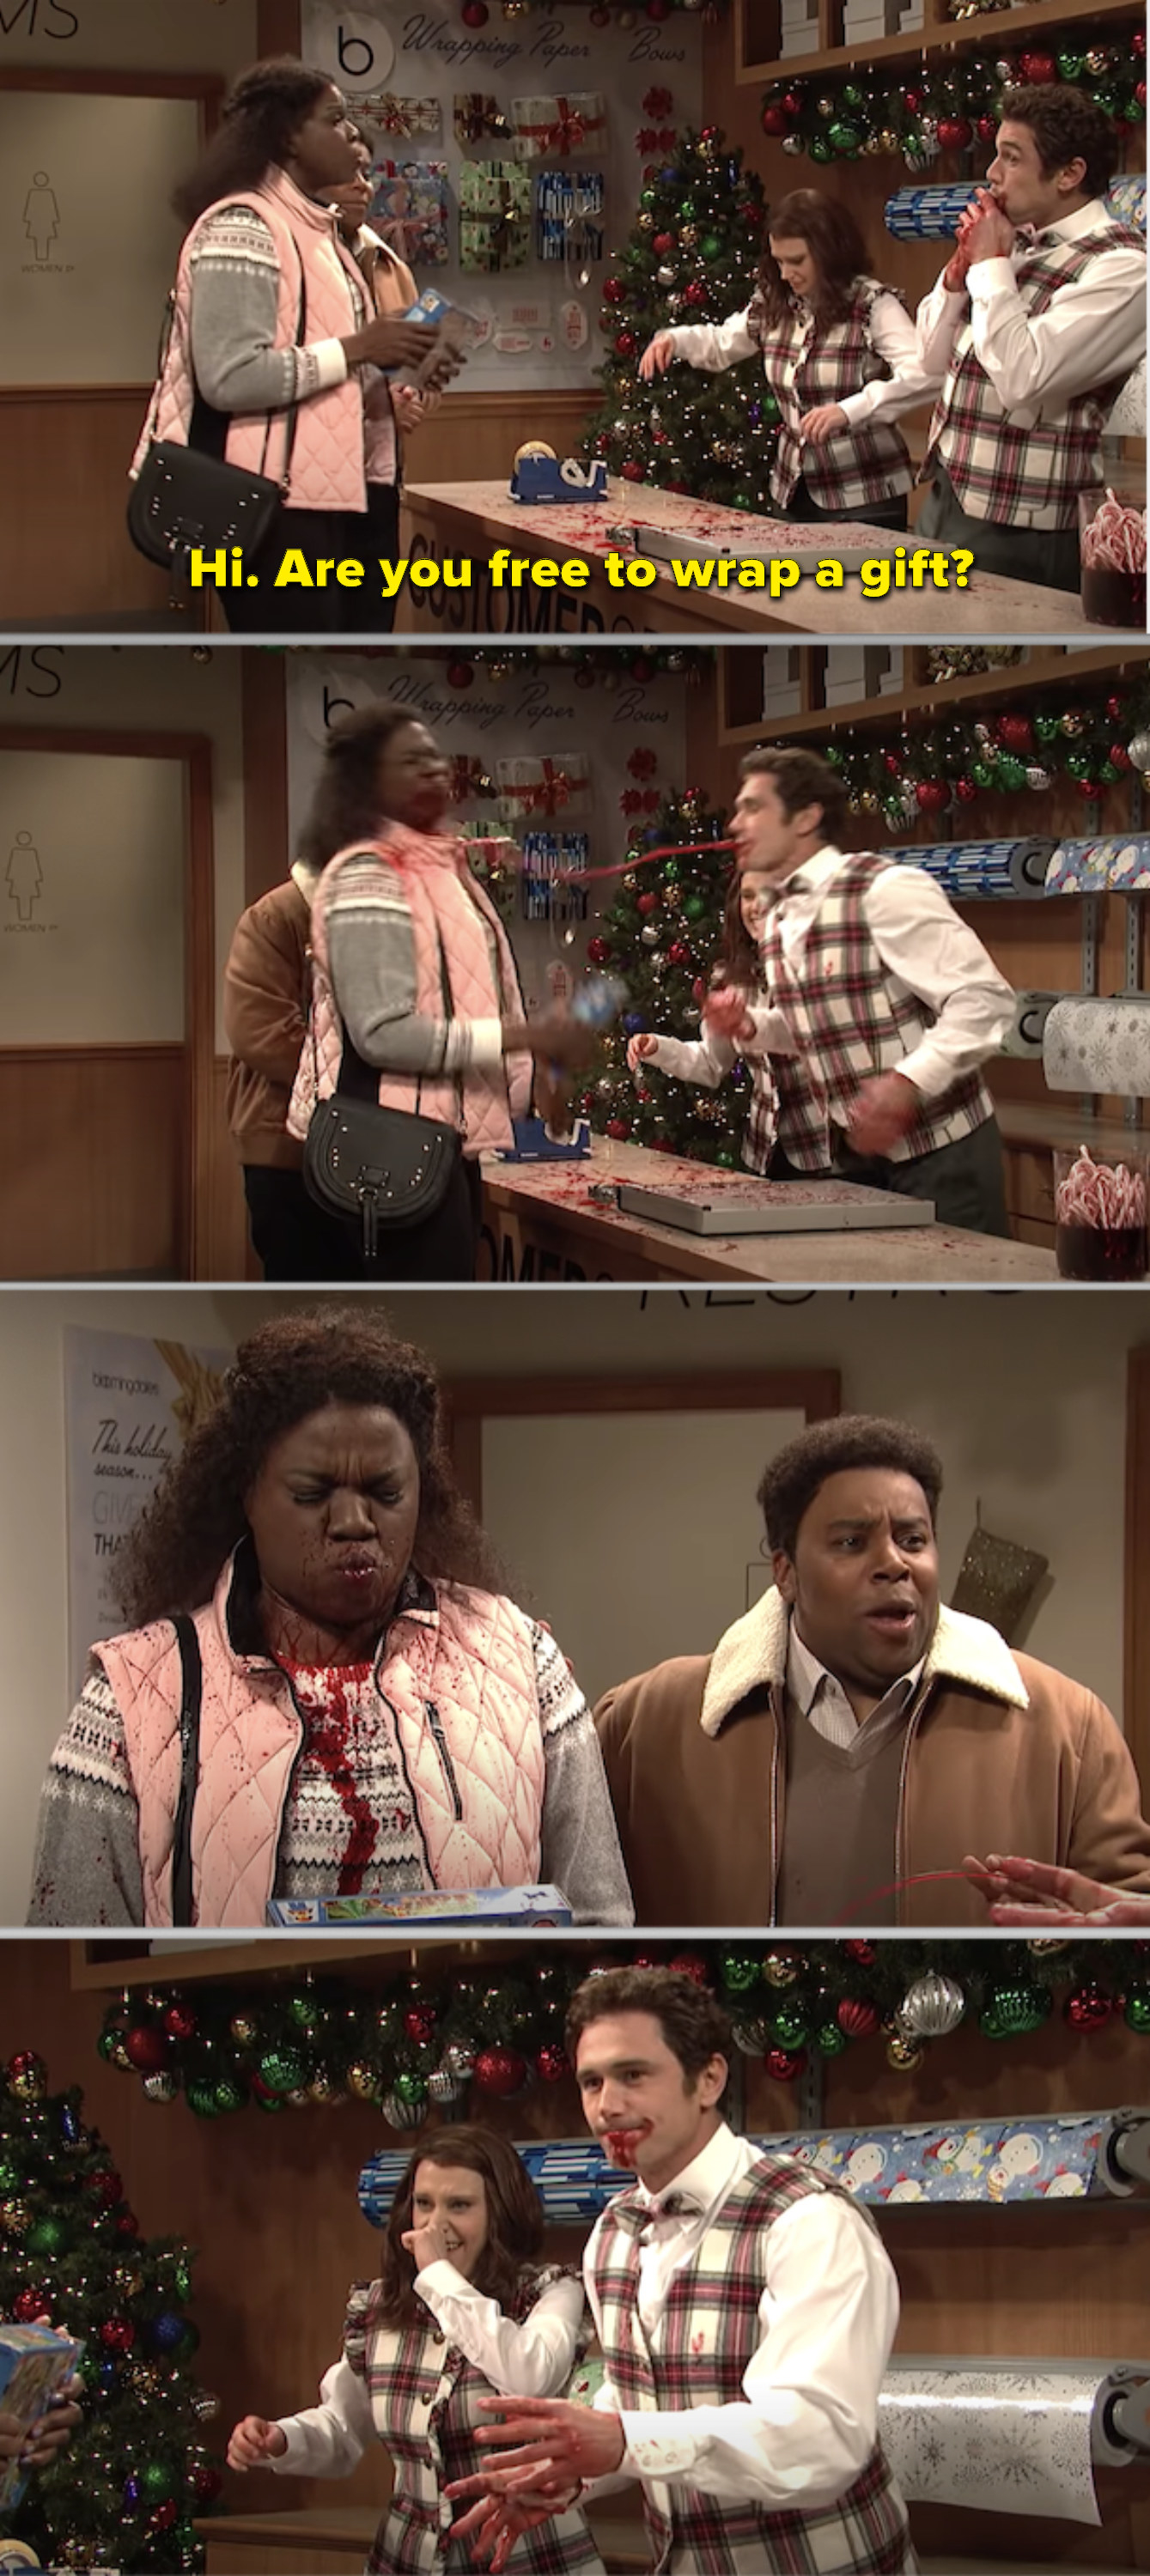 Three characters in a festive setting with dialogue from a TV show scene